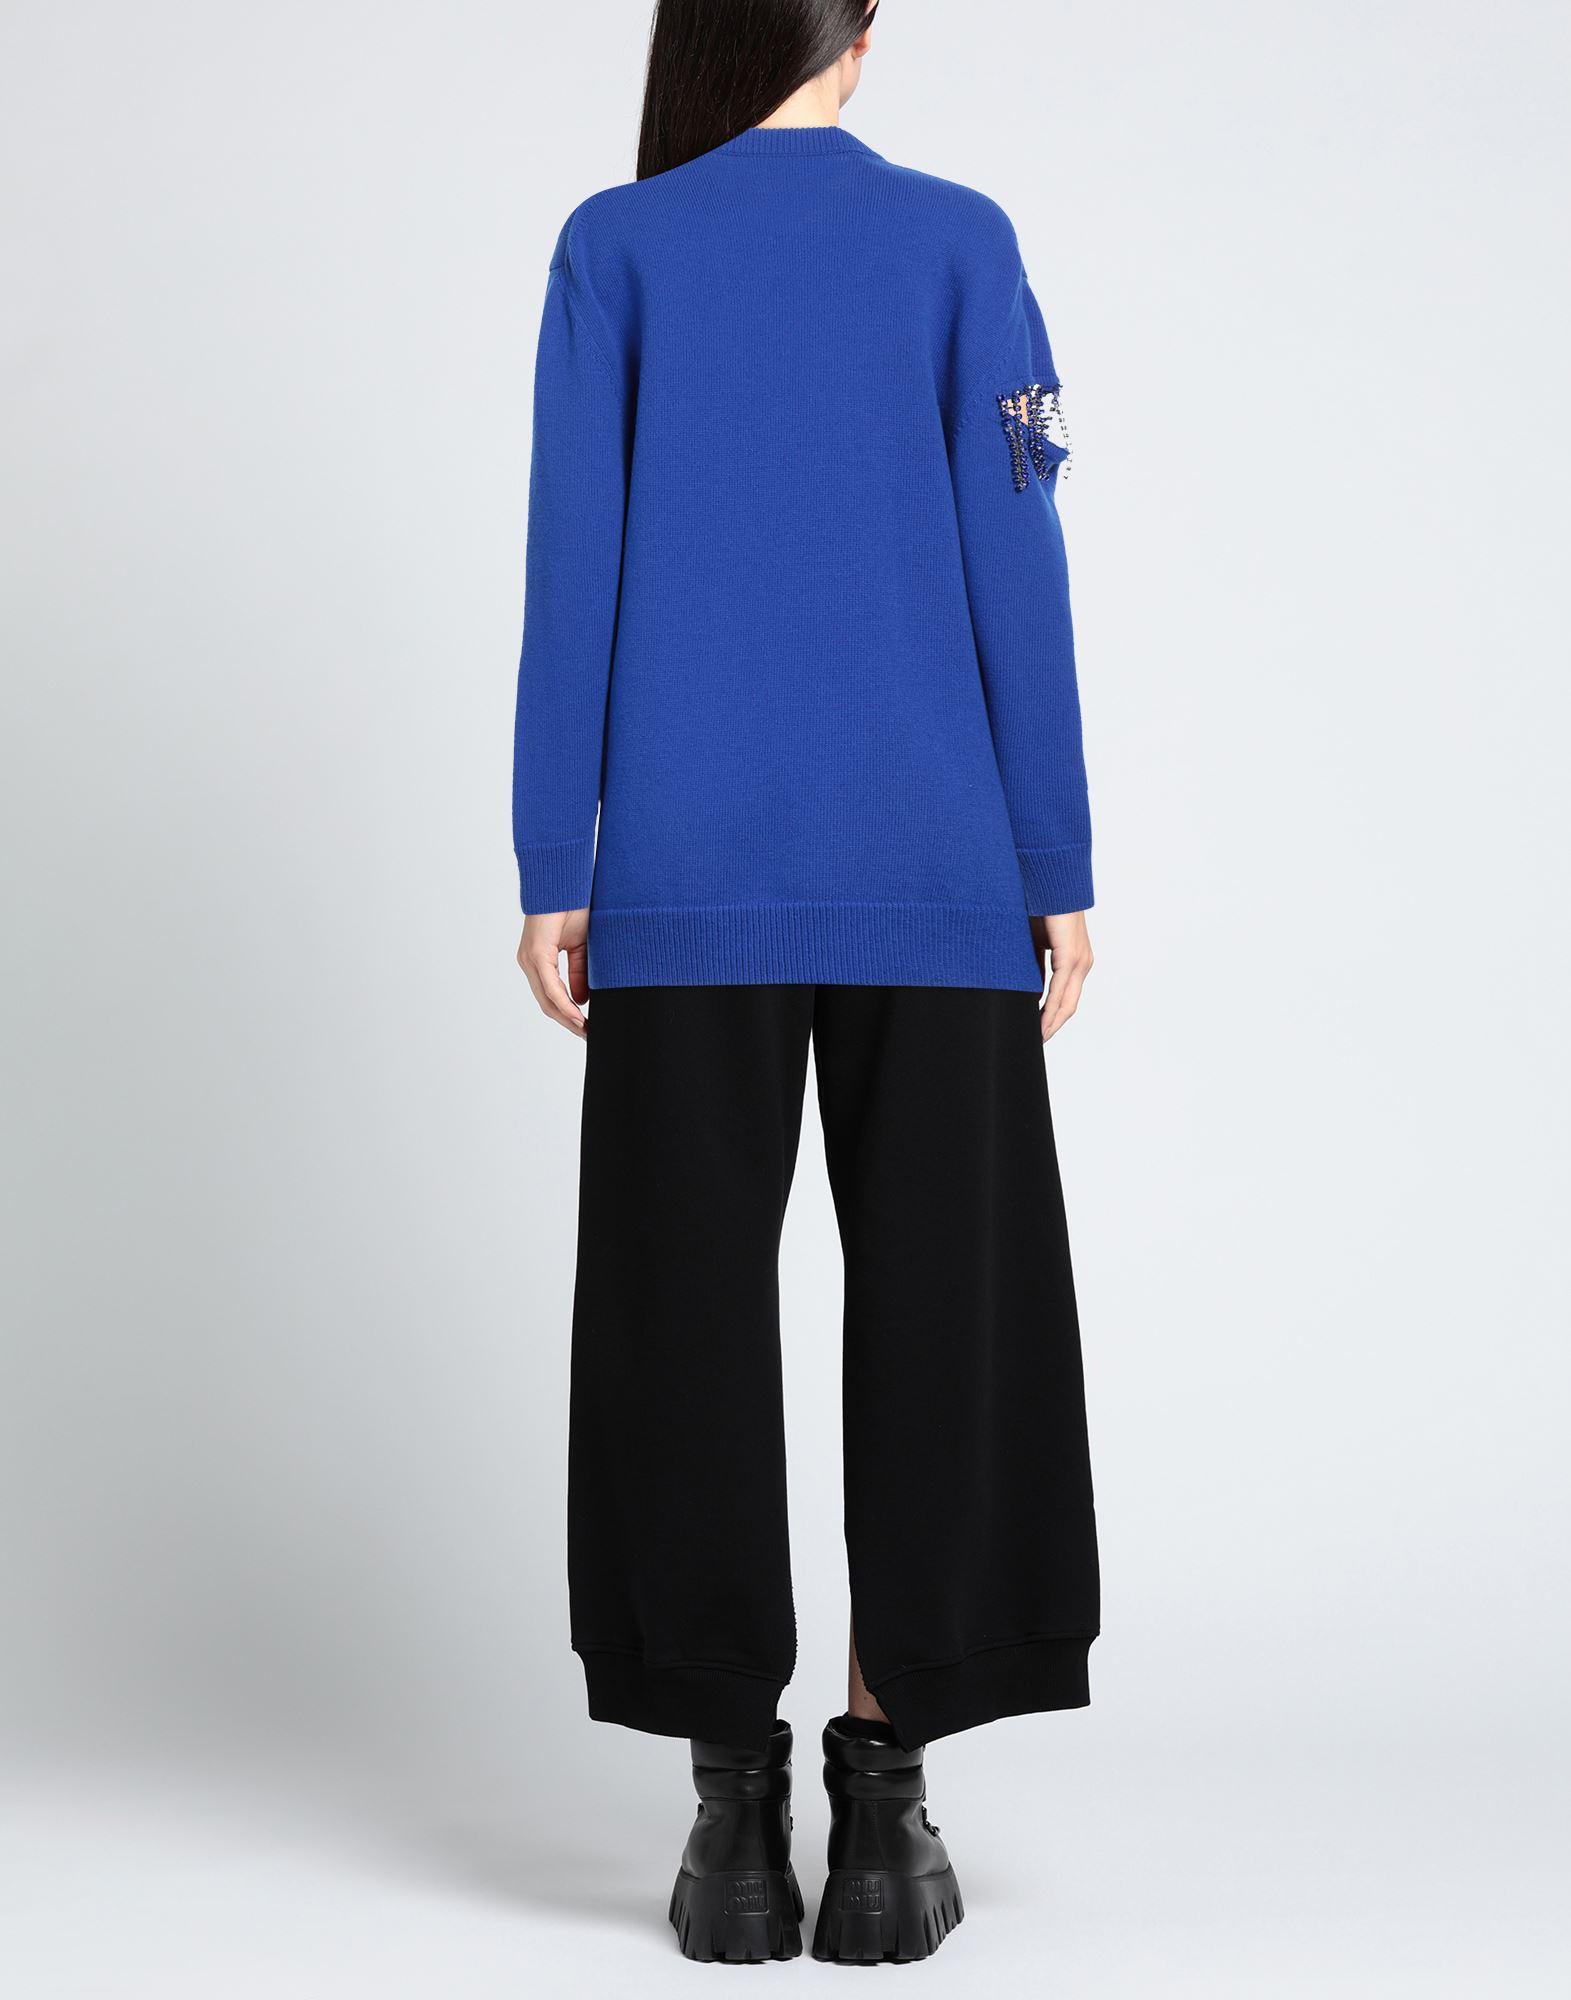 Christopher Kane Sweater in Blue | Lyst